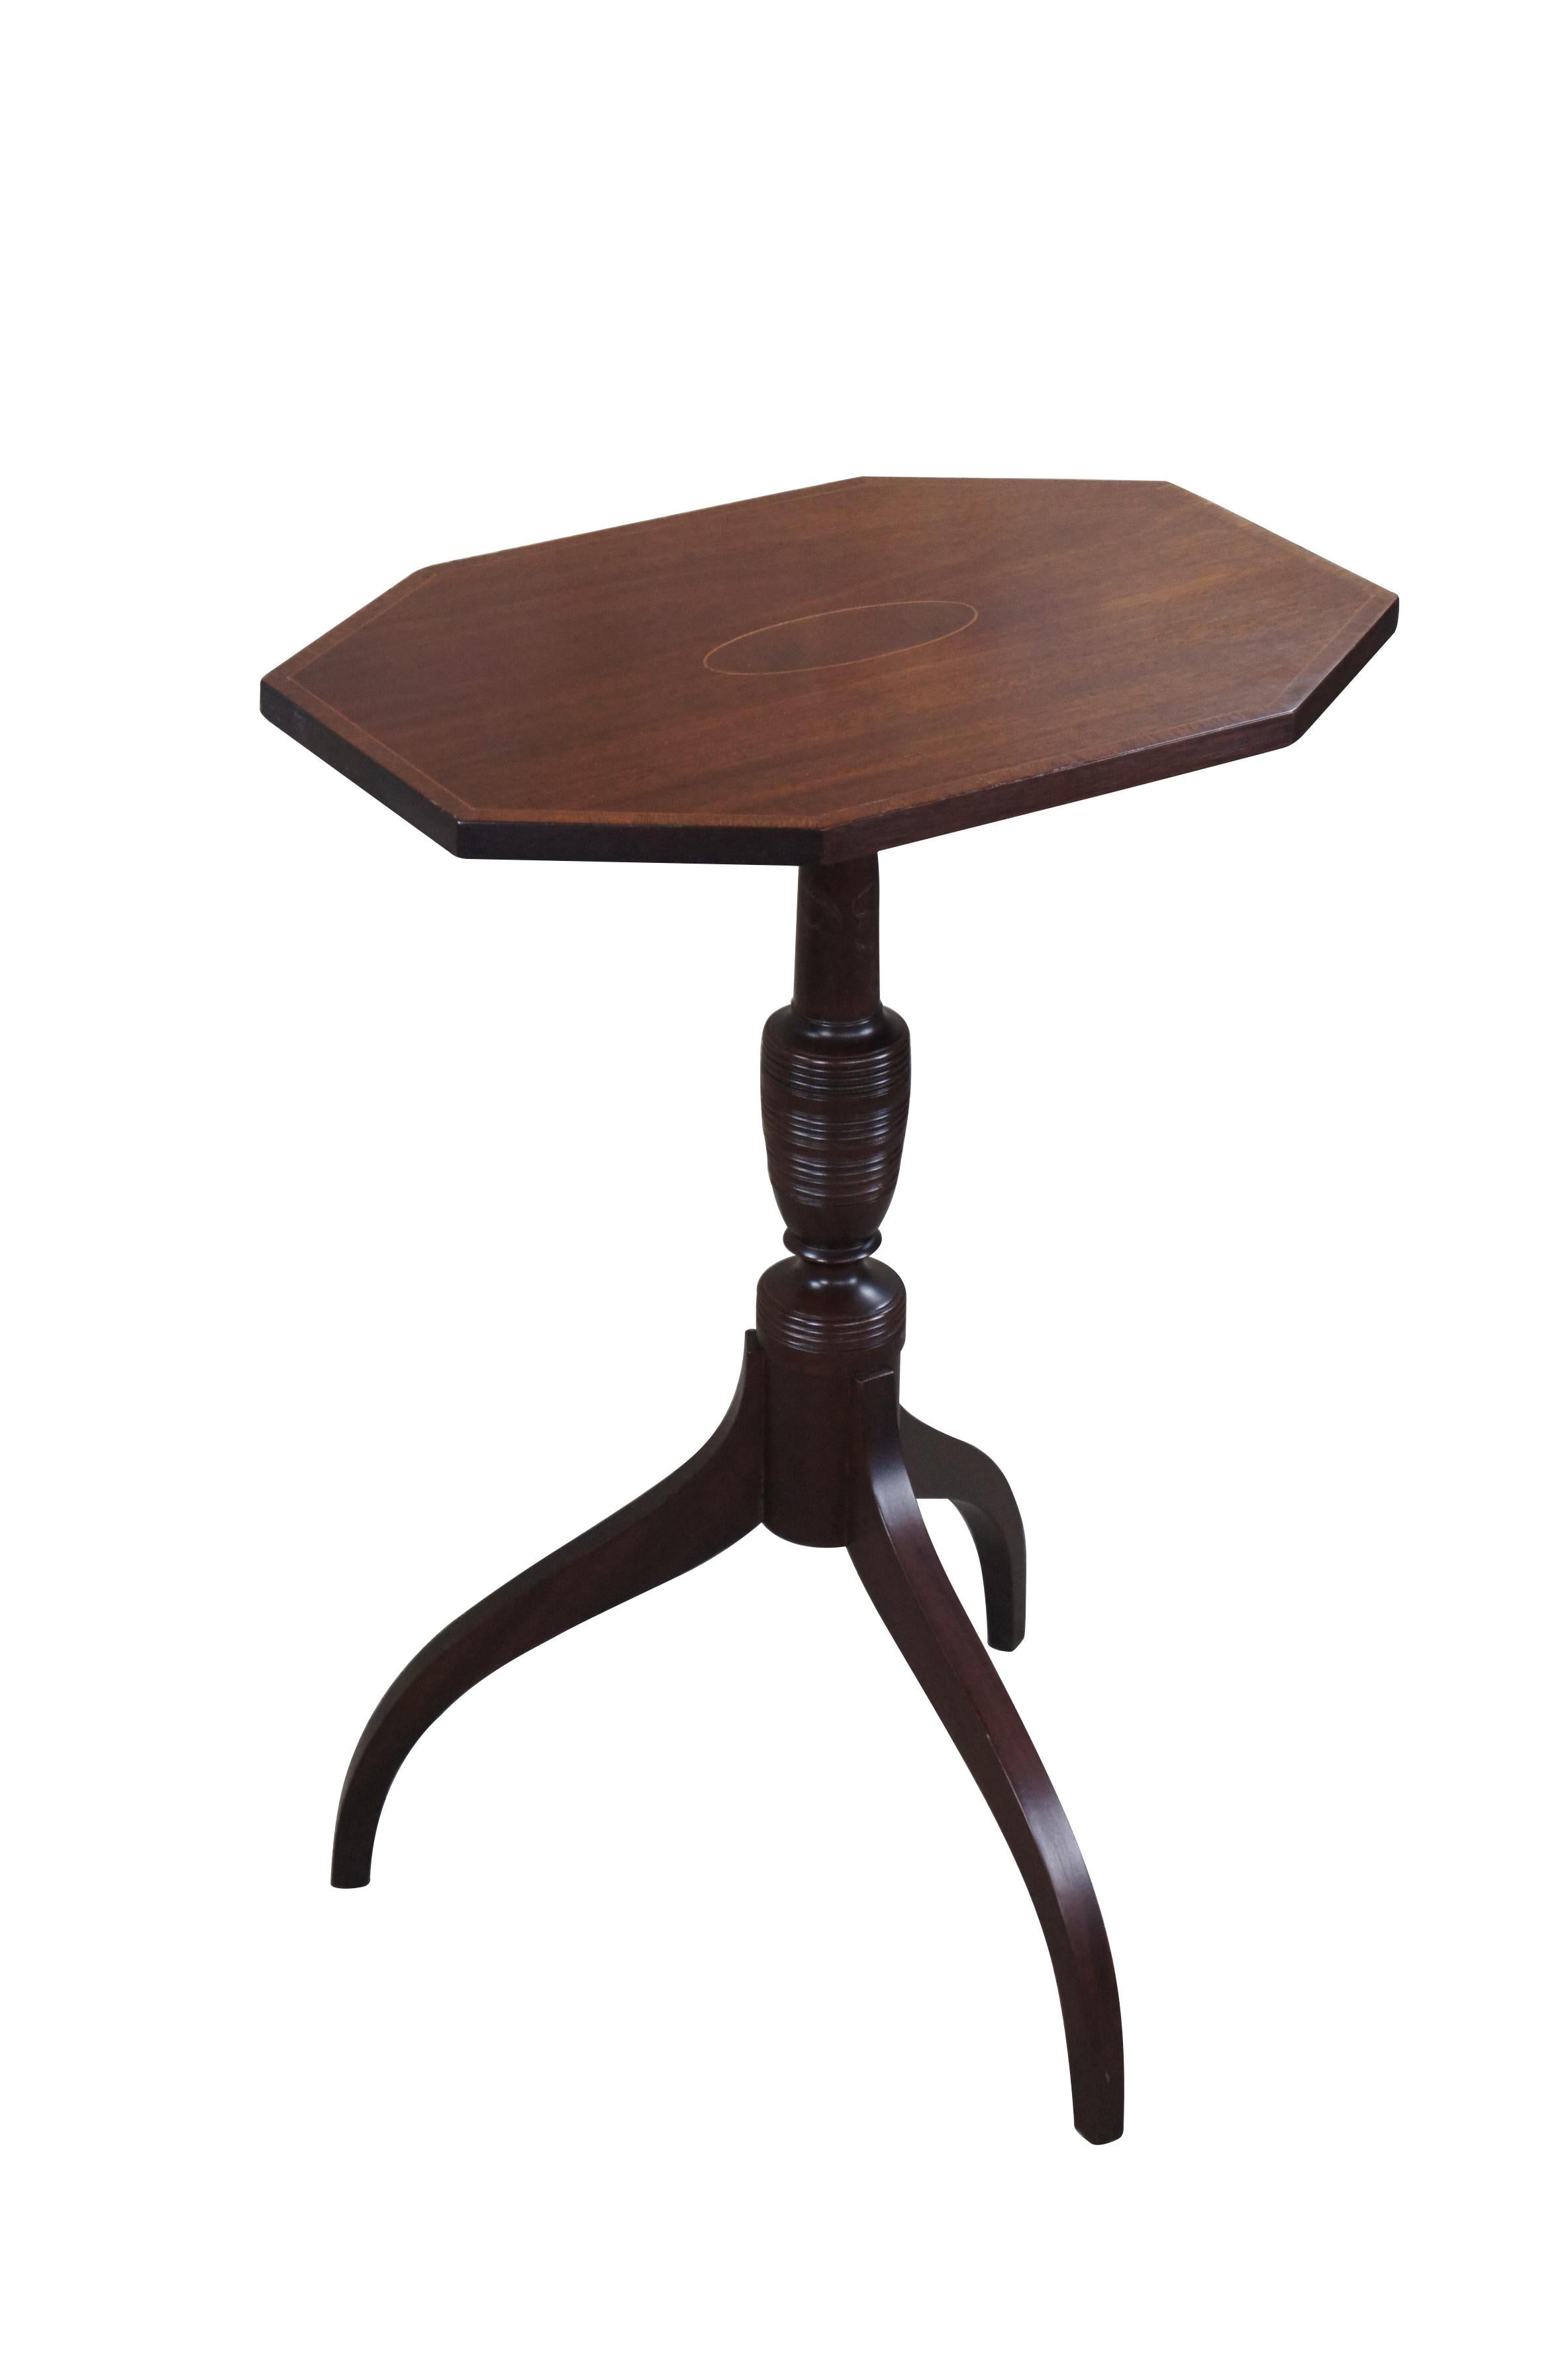 Biggs Furniture Old Sturbridge Village Collection Federal Candle or Sculpture Stand, circa last half 20th century. Made from mahogany with an Octagonal inlaid and crossbanded top over turned and ribbed center support leading to spider leg base.